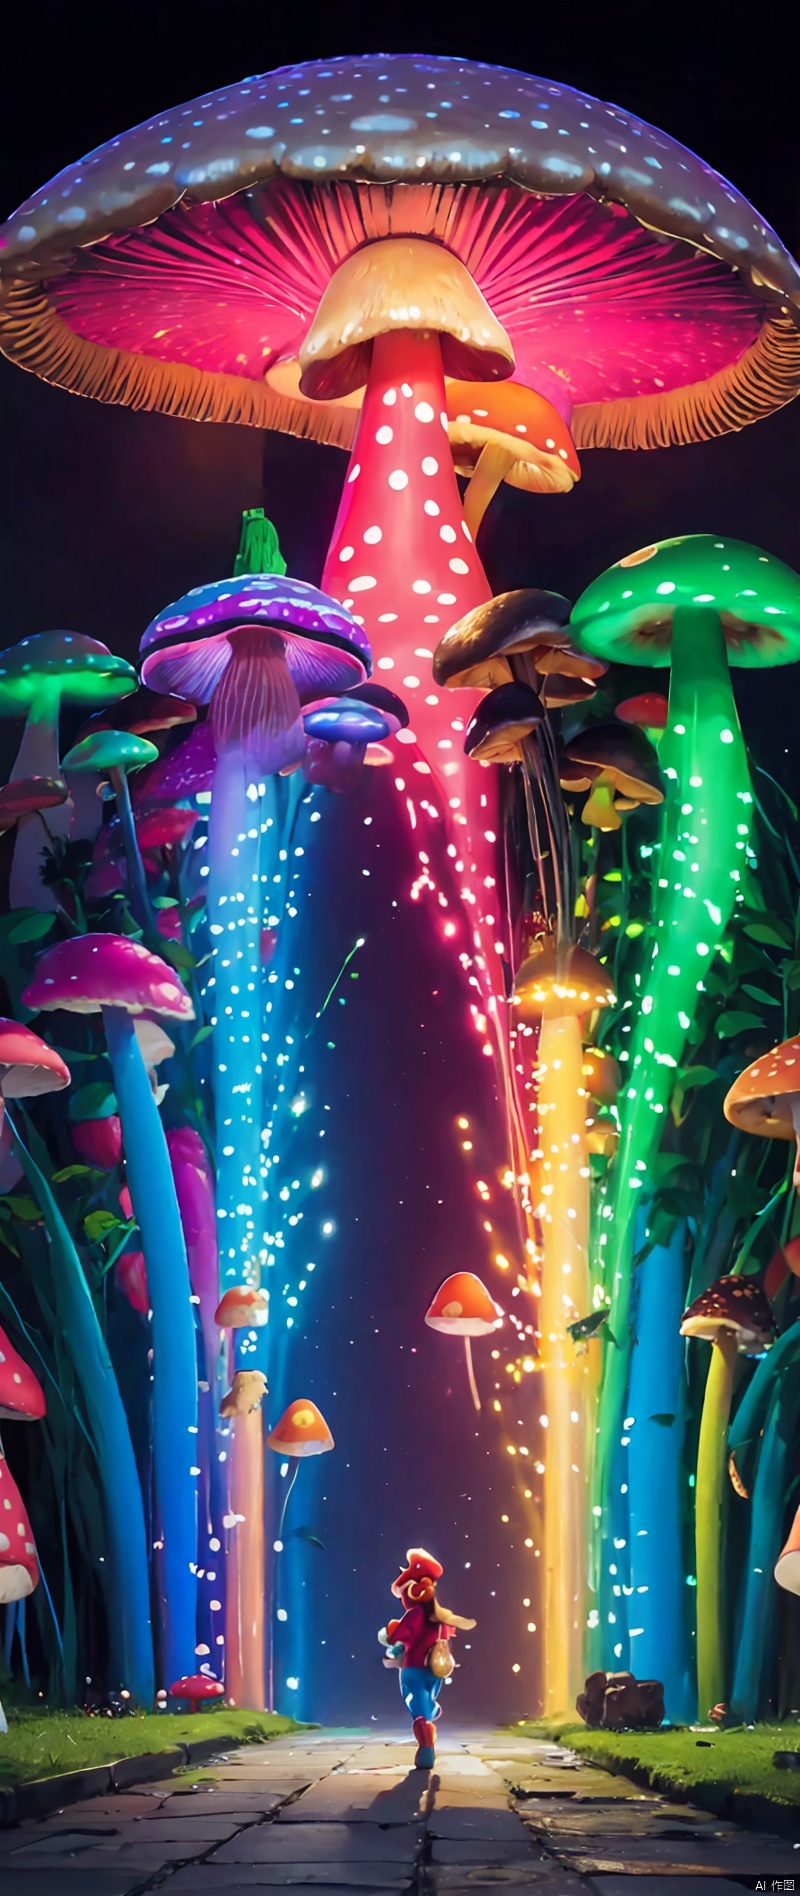 (neon,supermario,8k,great quality,superb image without distortion,masterpiece,psychedelic colors,fantasy world,highly detailed,walking mushrooms)